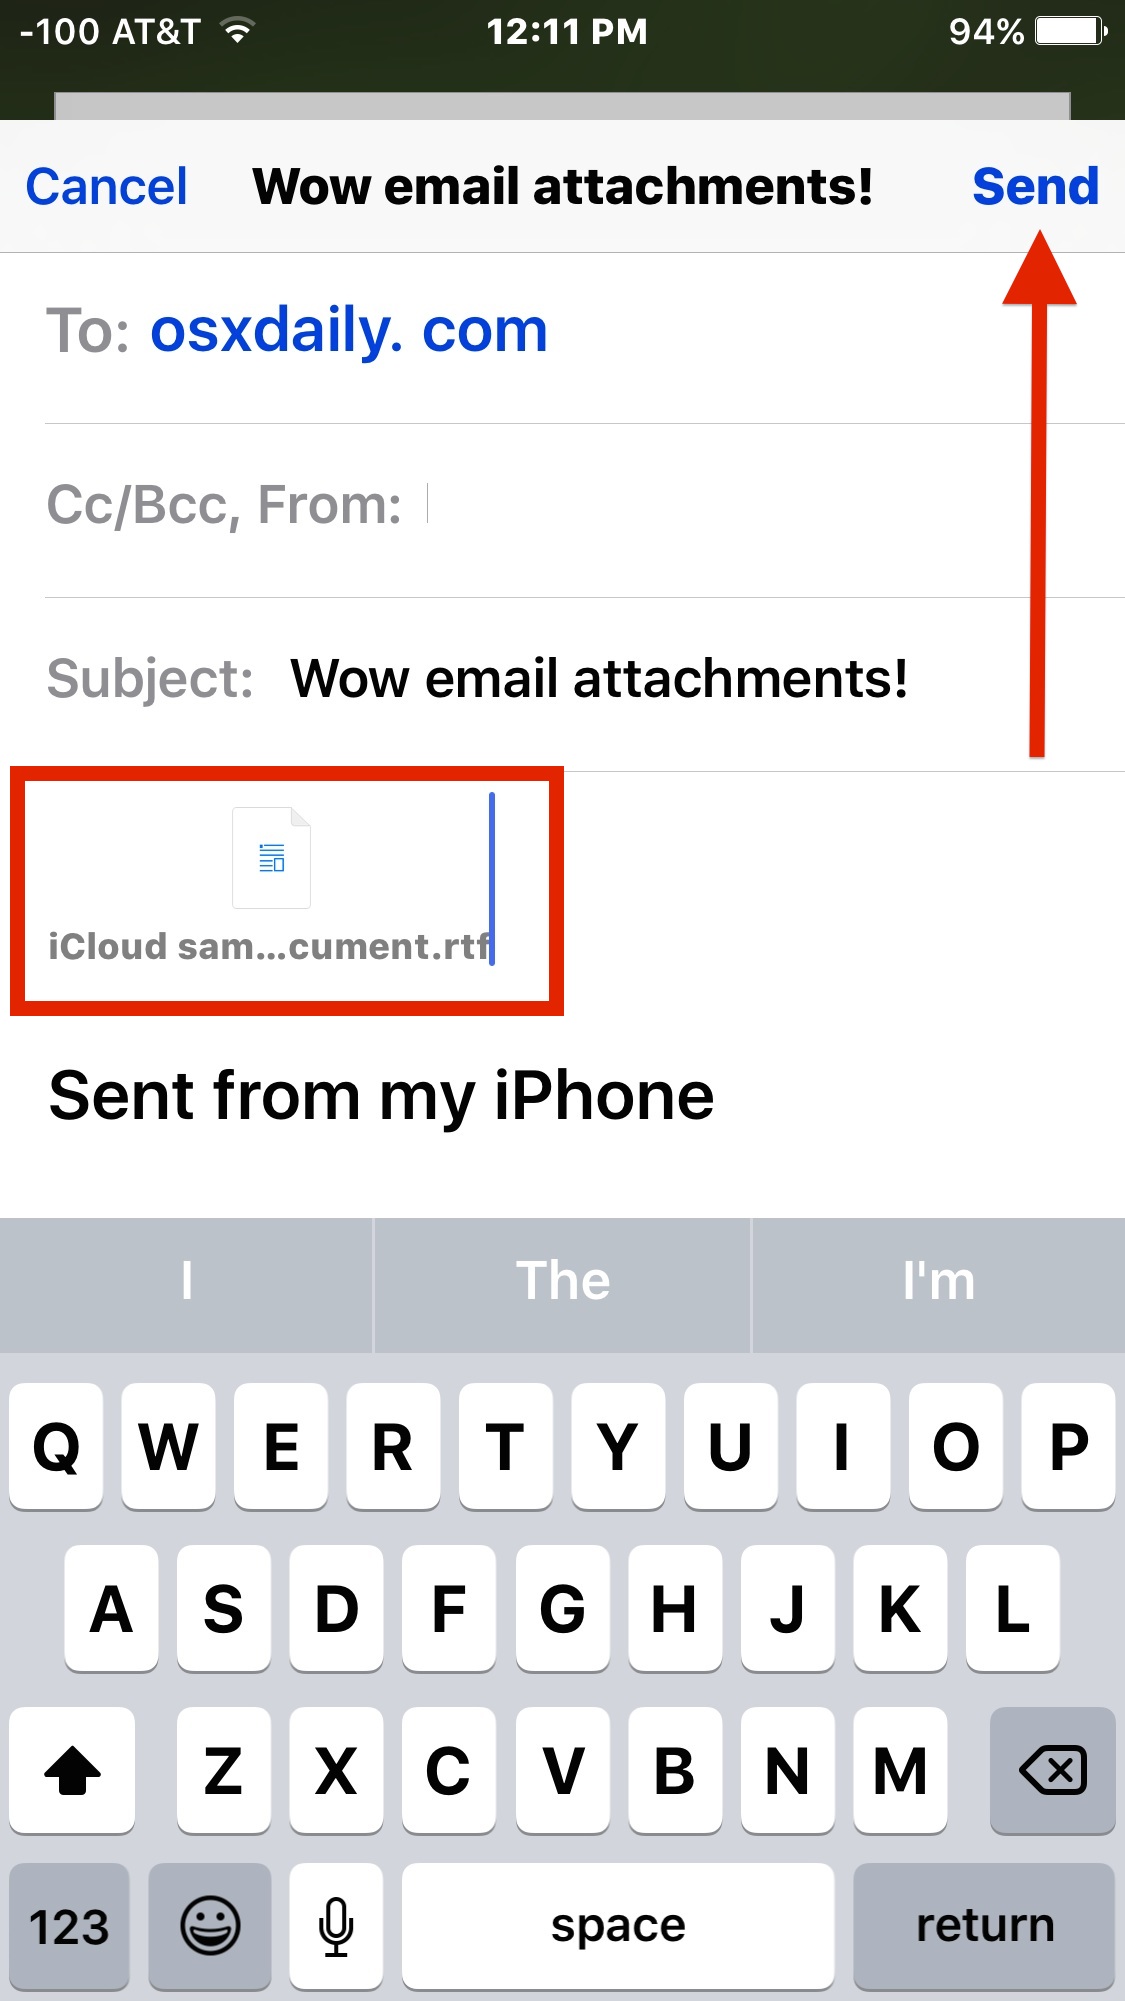 Send an email with attachment in Mail for iOS